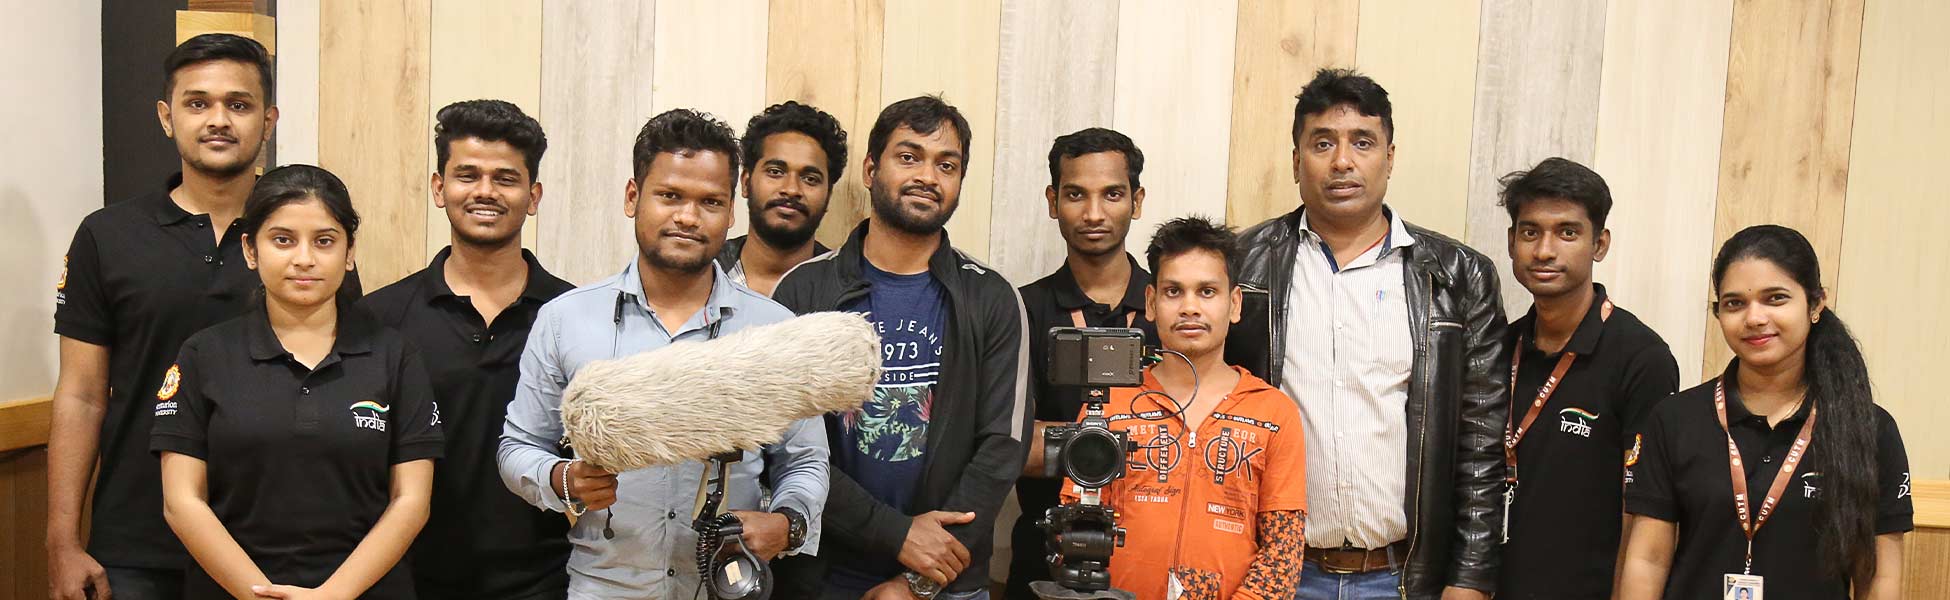 film production services in Patan, video production services in Patan, tv production services in Patan, production services in Patan